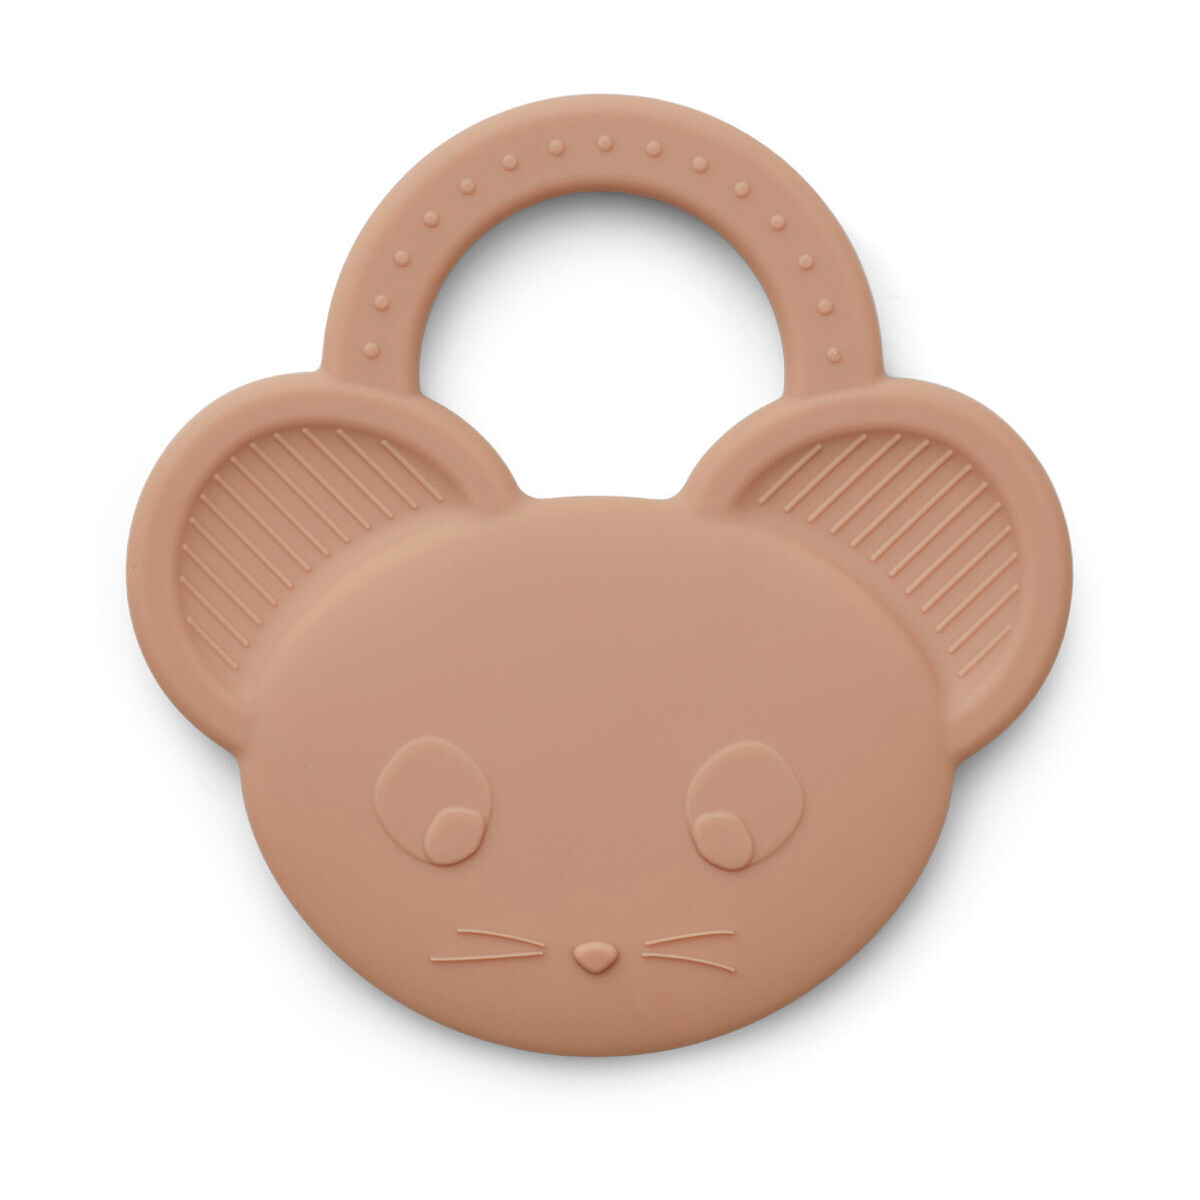 LIEWOOD GEMMA SILICONE TEETHER MOUSE PALE TUSCANY